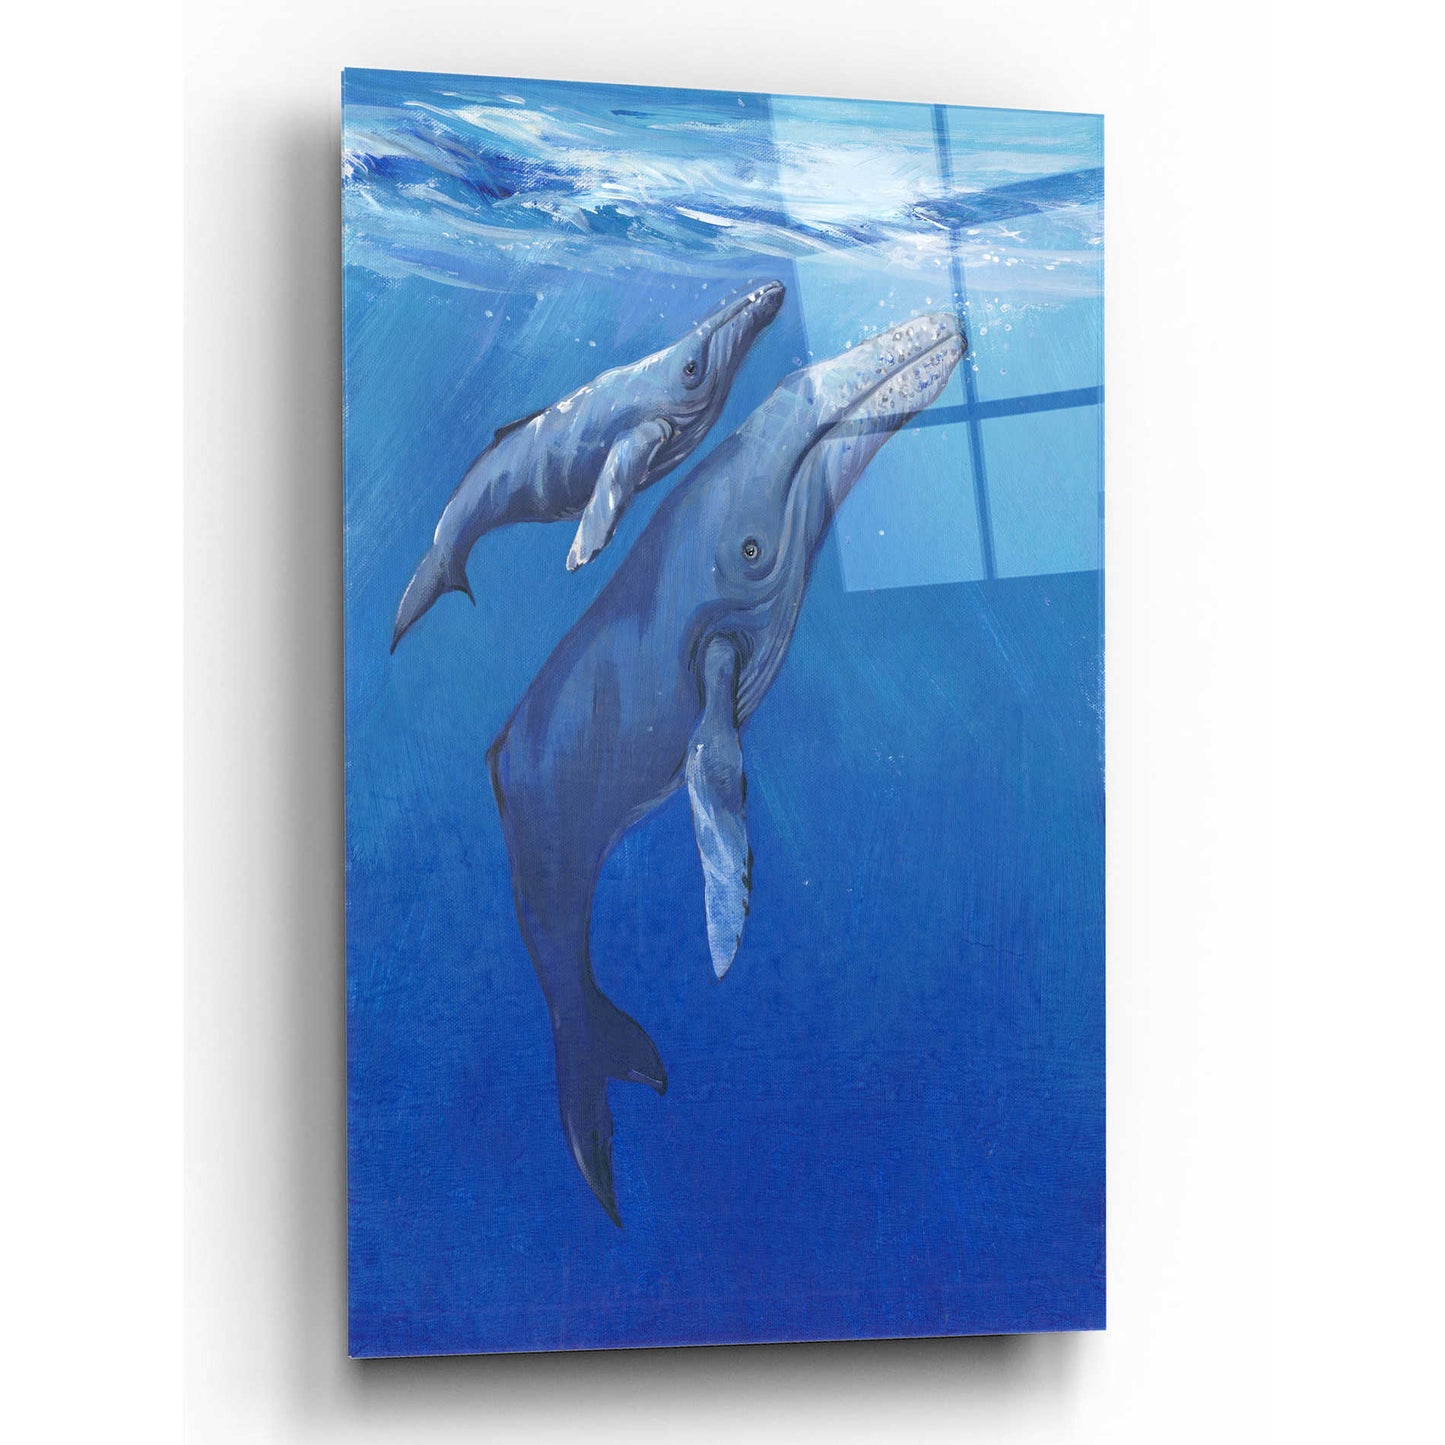 Epic Art 'Under Sea Whales I' by Tim O'Toole, Acrylic Glass Wall Art,12x16